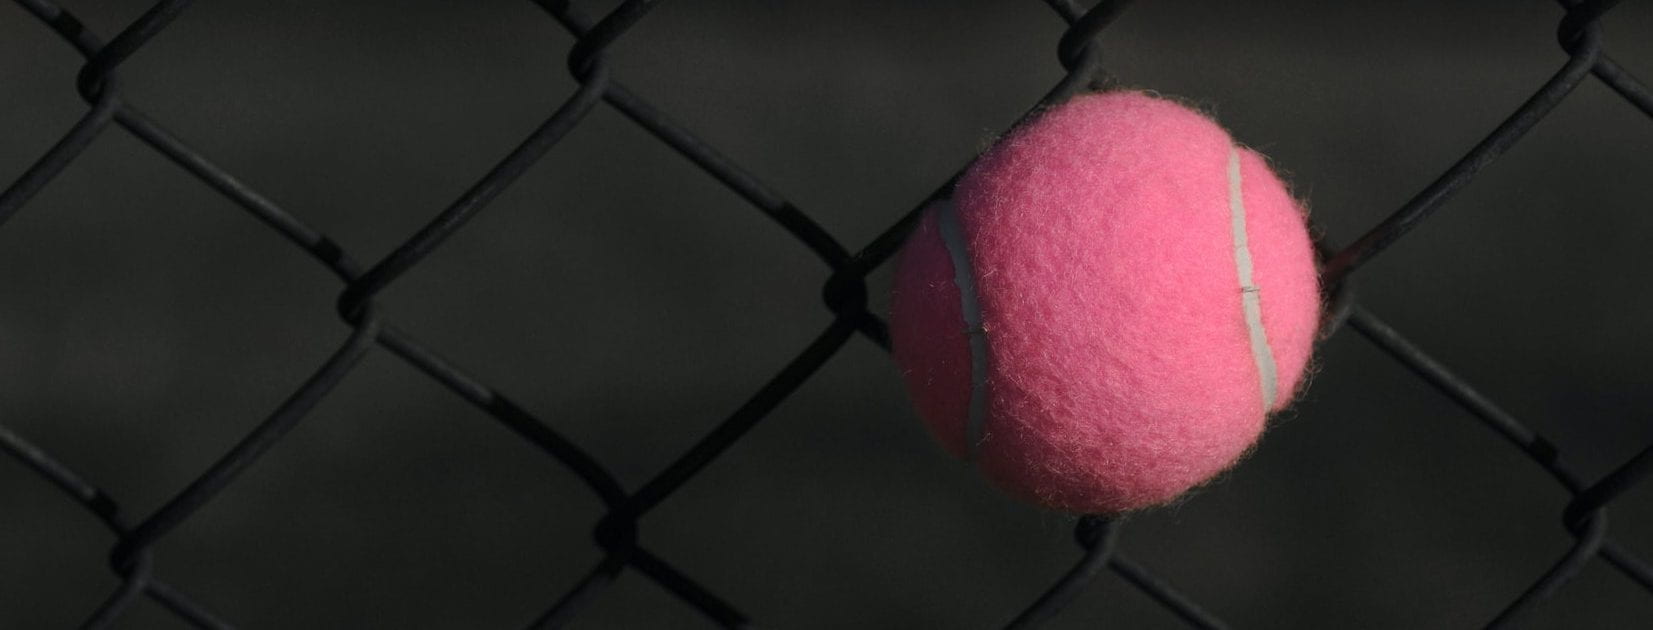 pink tennis ball on a black fence